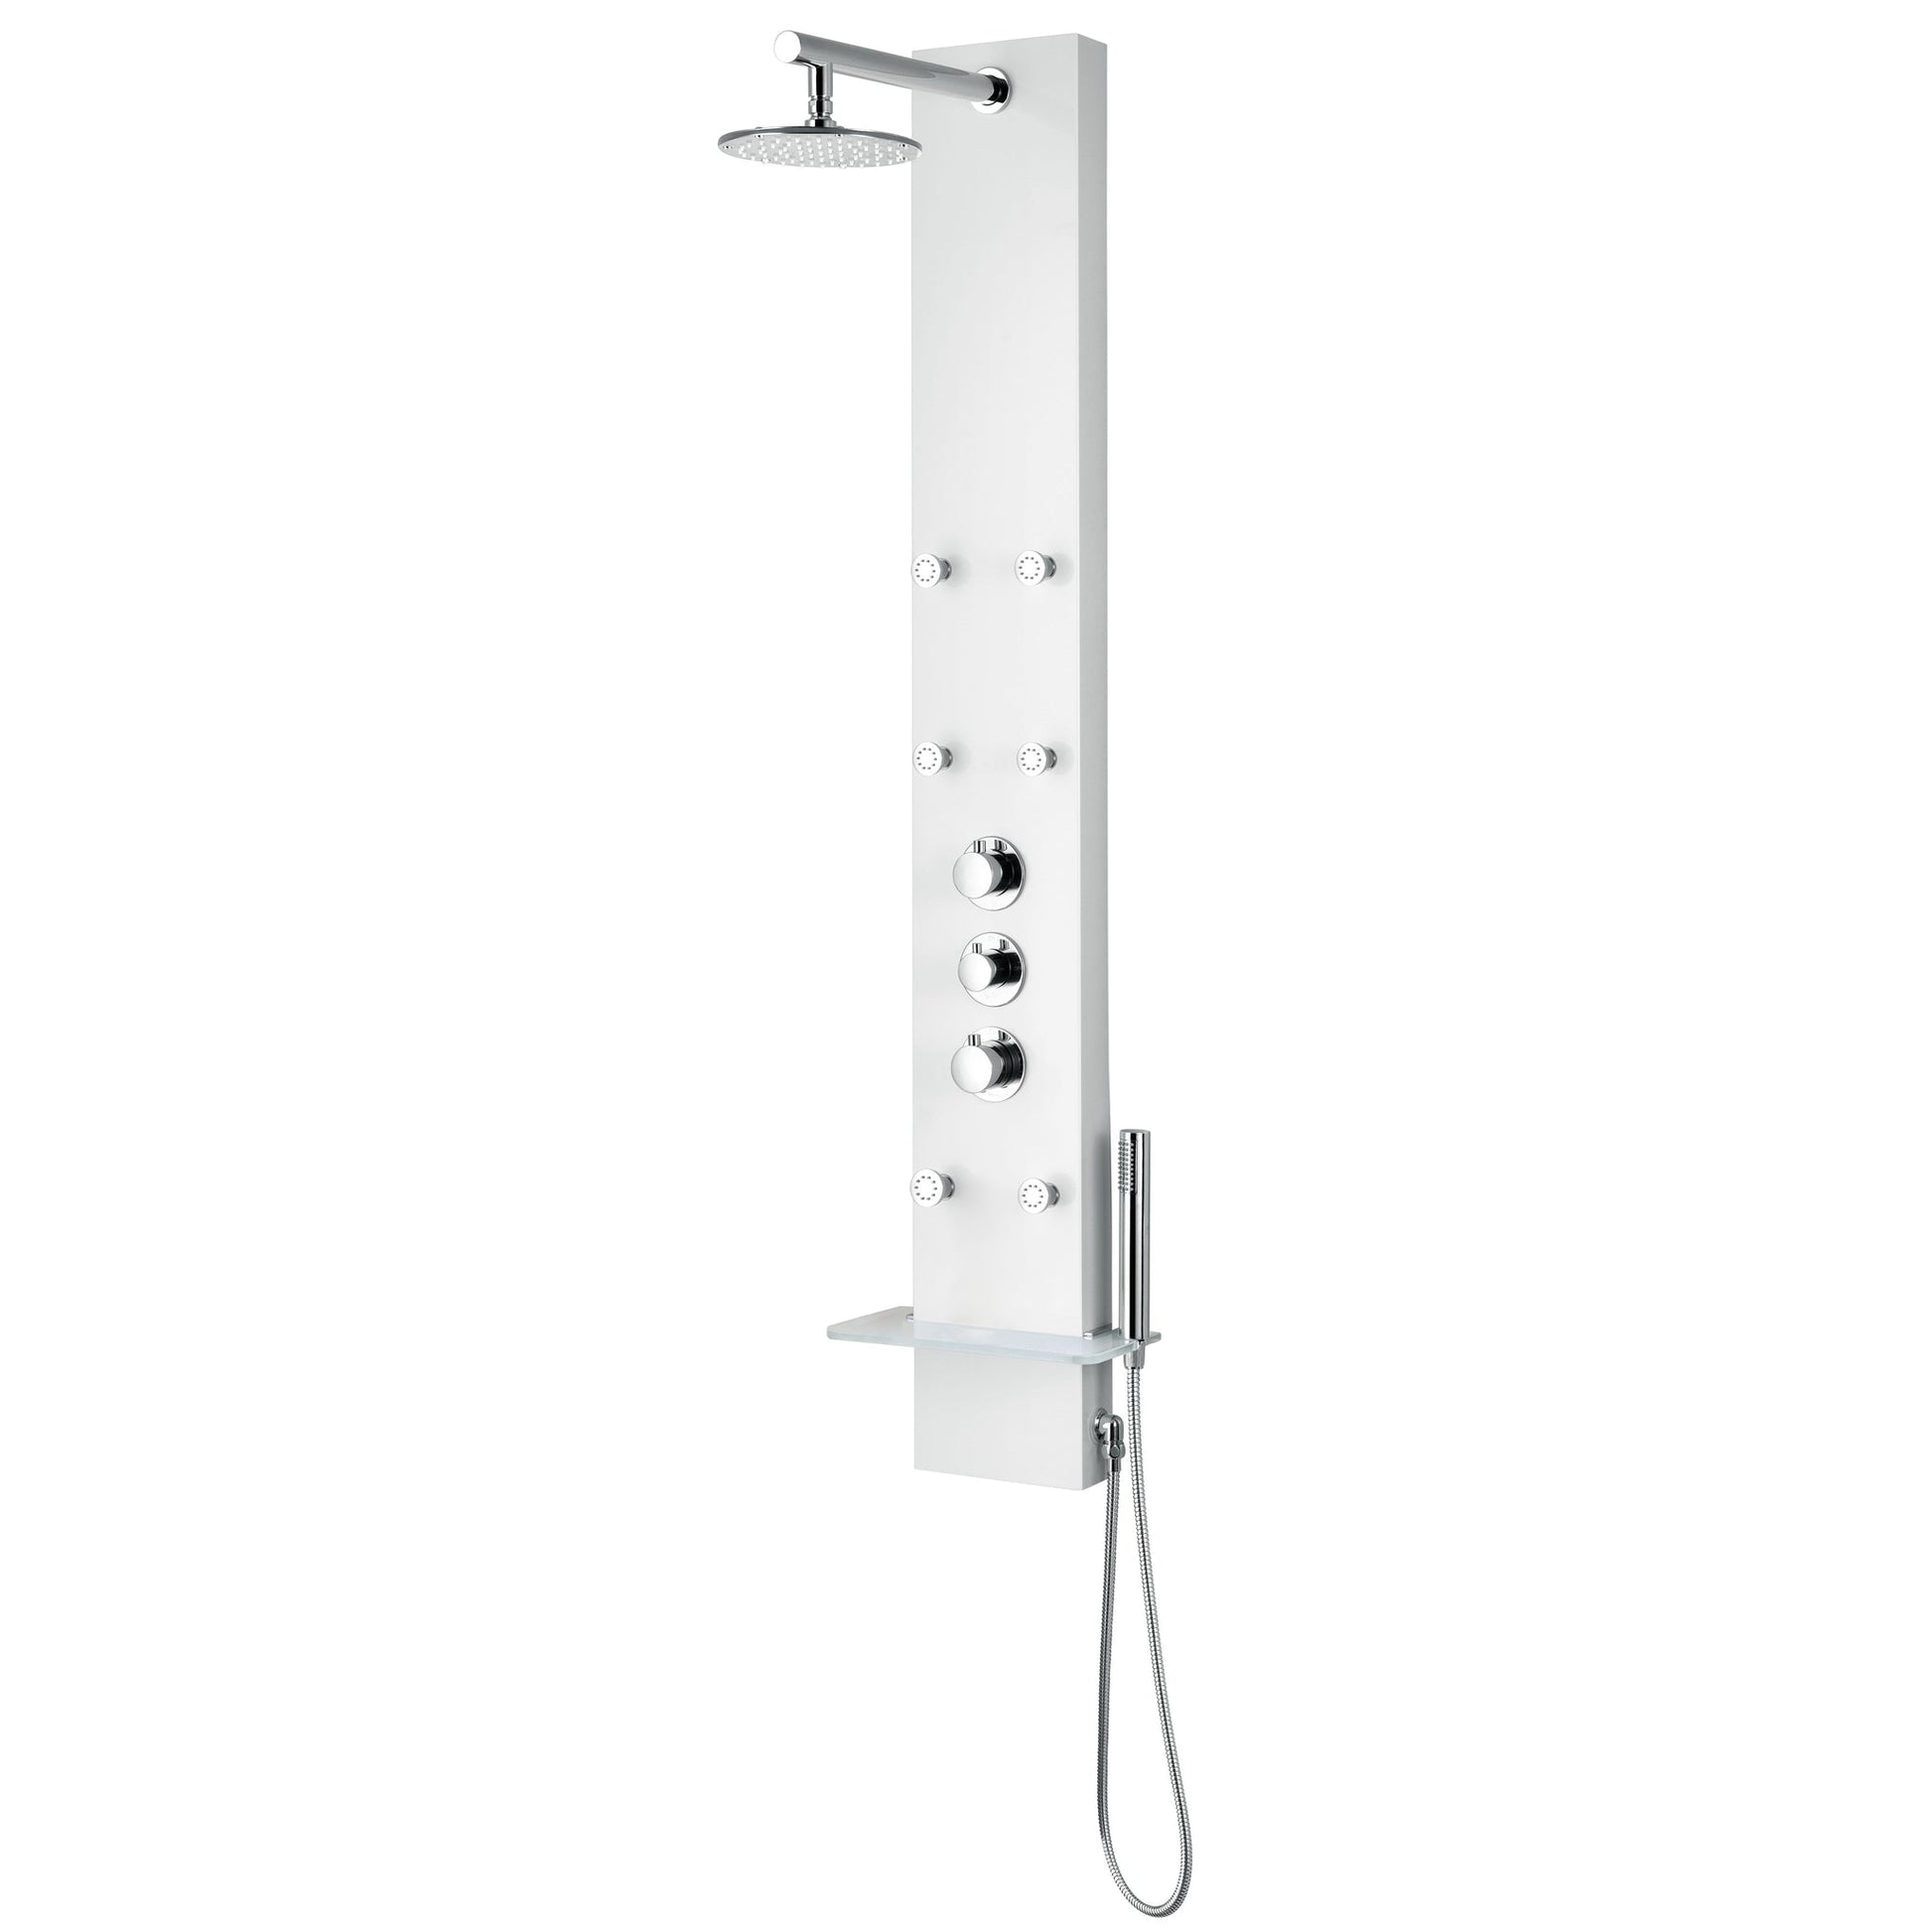 ANZZI Donna Series 60" White 6-Jetted Full Body Shower Panel With Heavy Rain Shower Head and Euro-Grip Hand Sprayer